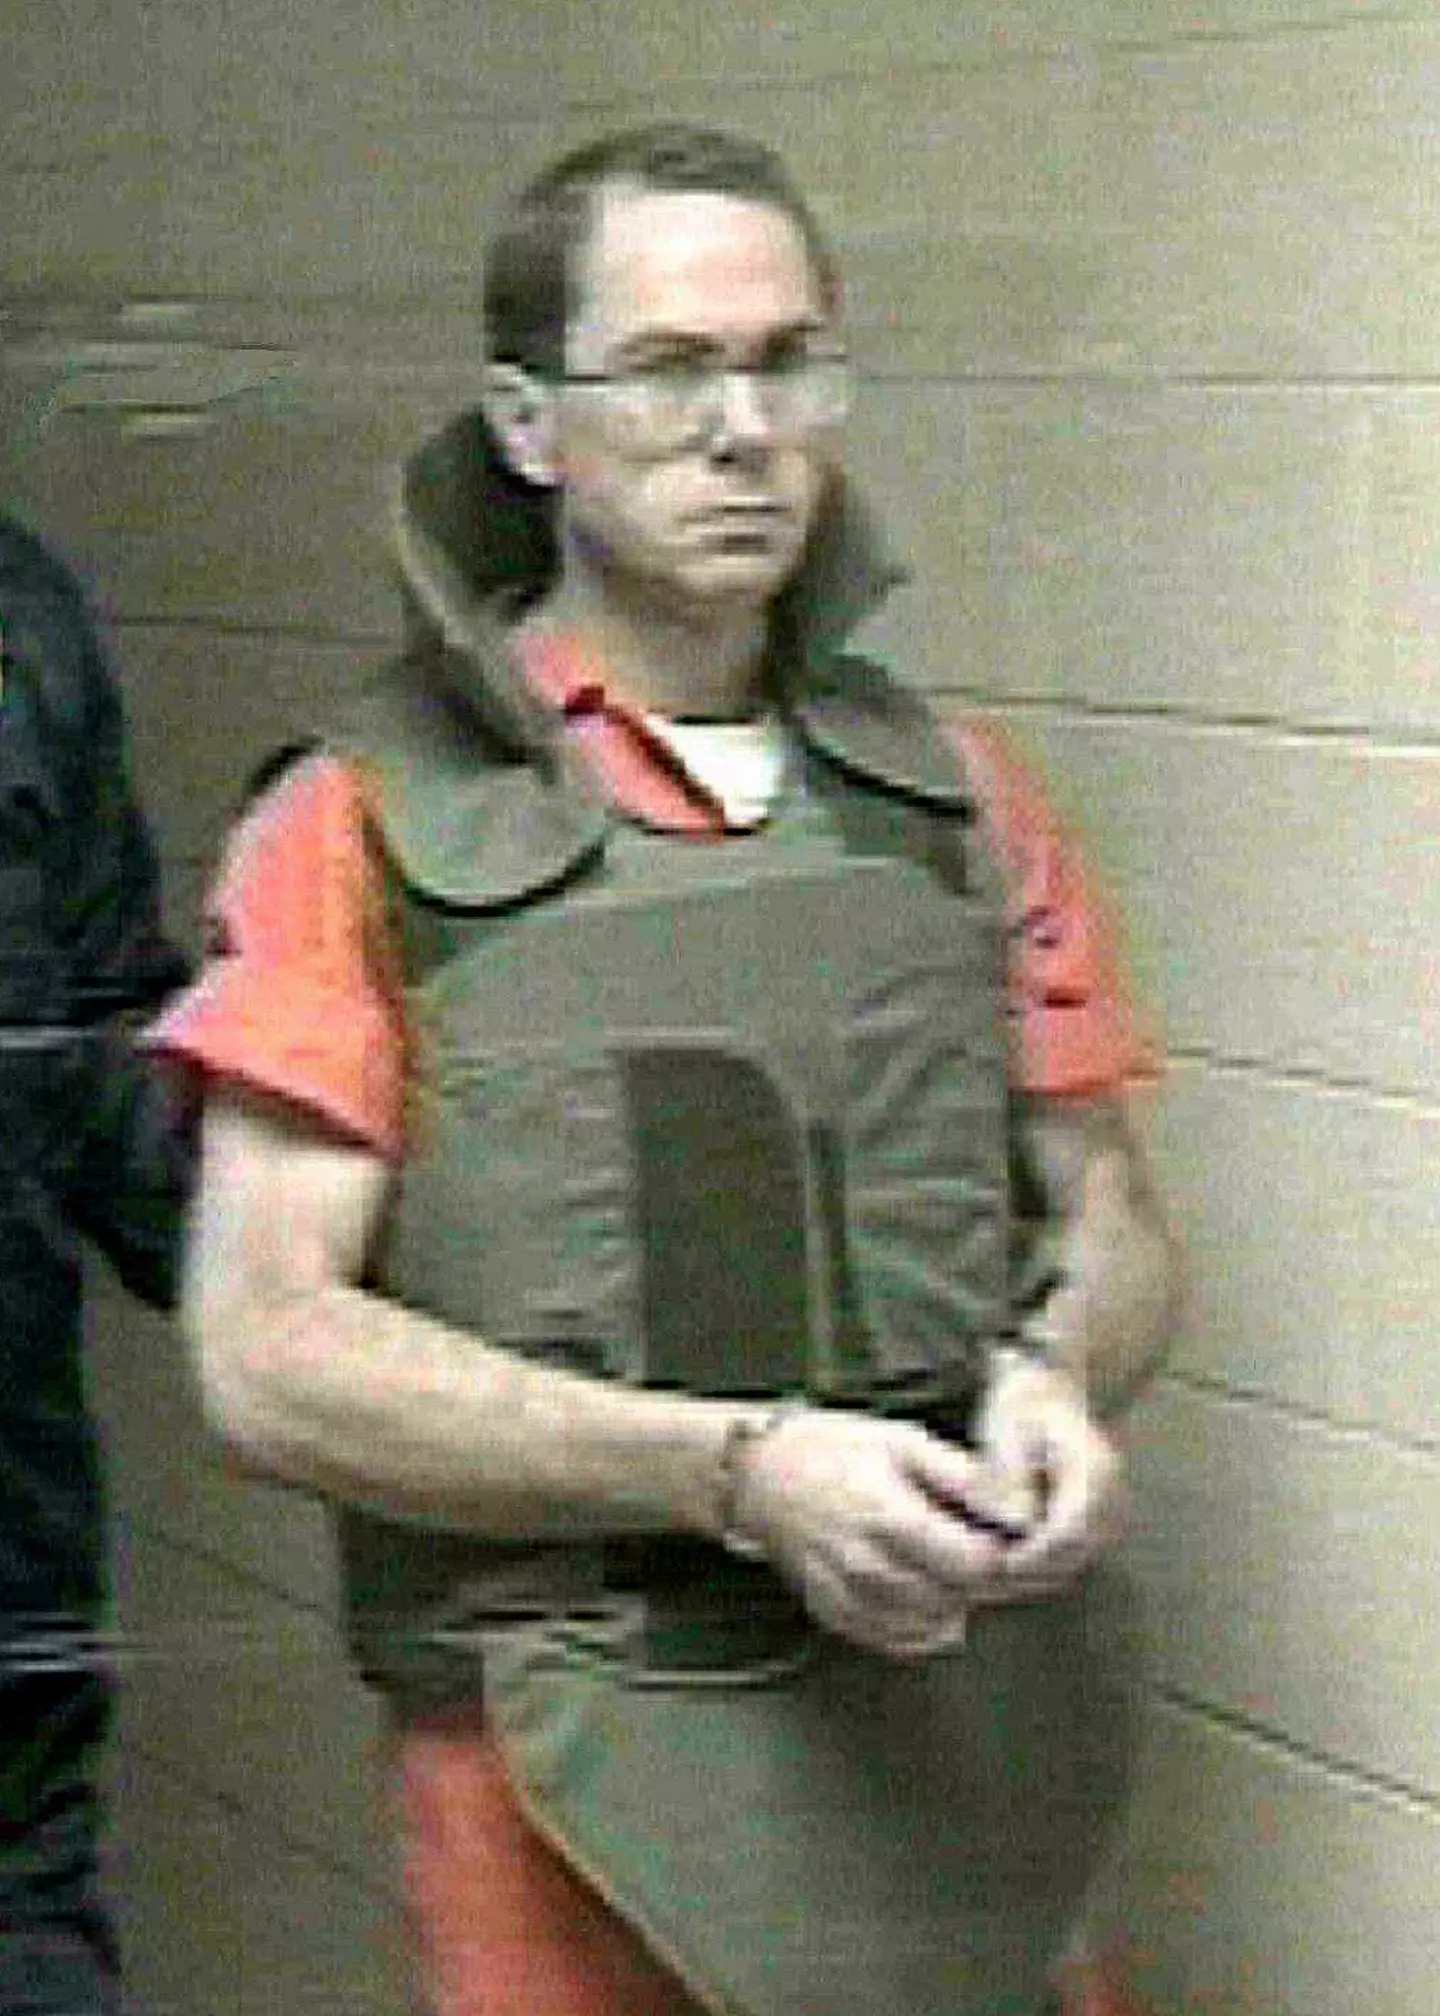 Terry Nichols was found to have helped Timothy McVeigh build the bomb.